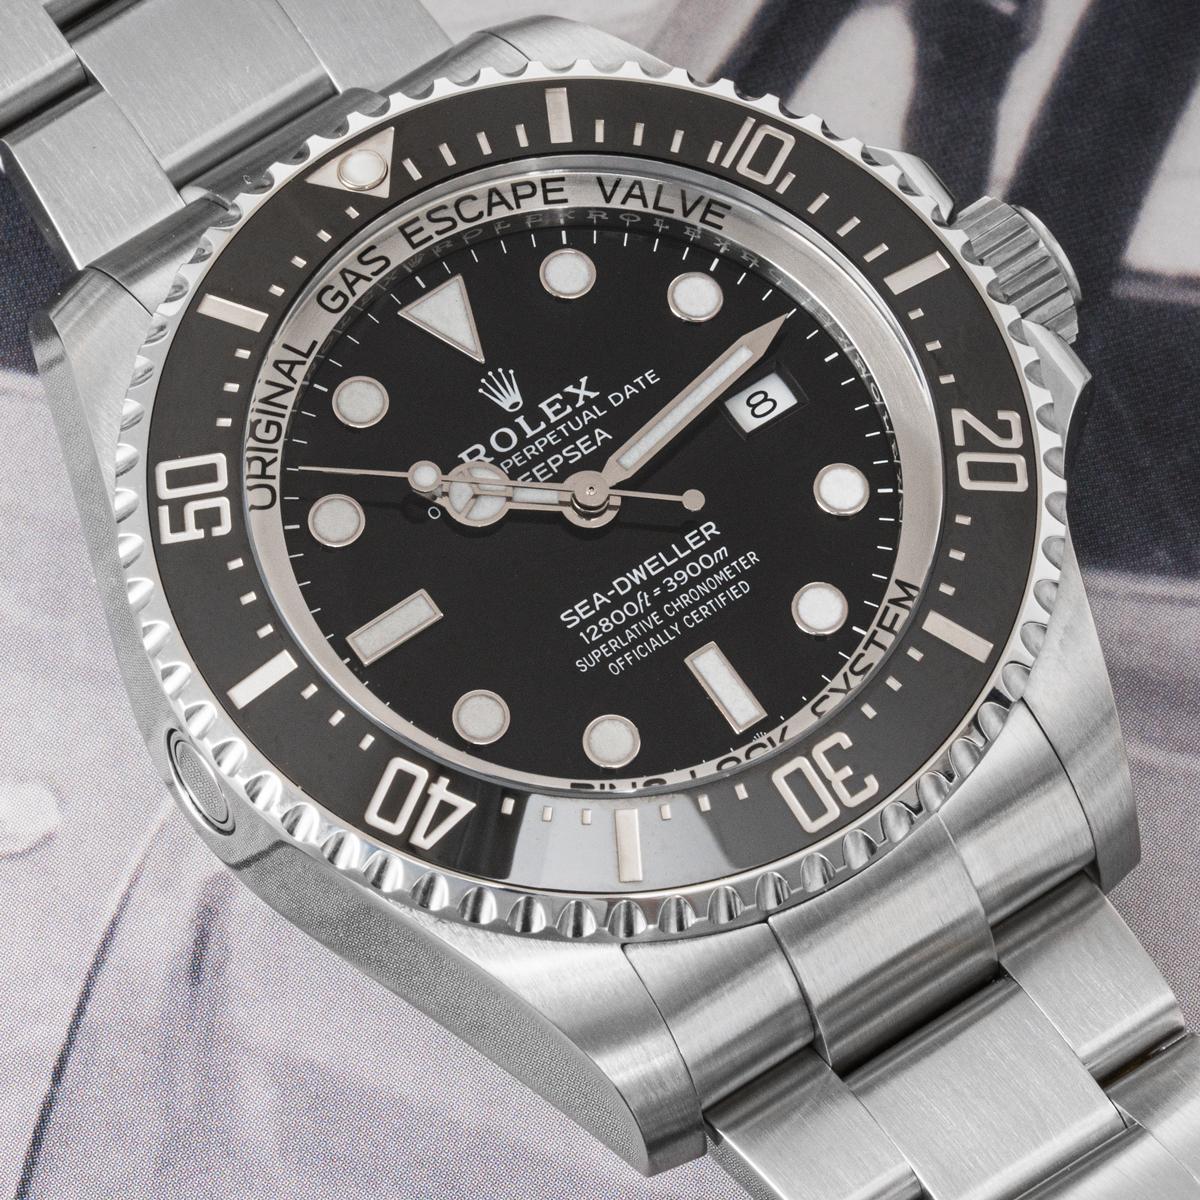 A Deepsea Sea-Dweller in Oystersteel by Rolex. Featuring a black dial covered by a domed scratch-resistant sapphire crystal. The black ceramic unidirectional rotatable bezel has 60 minute graduations coated in platinum. Features an Oyster bracelet